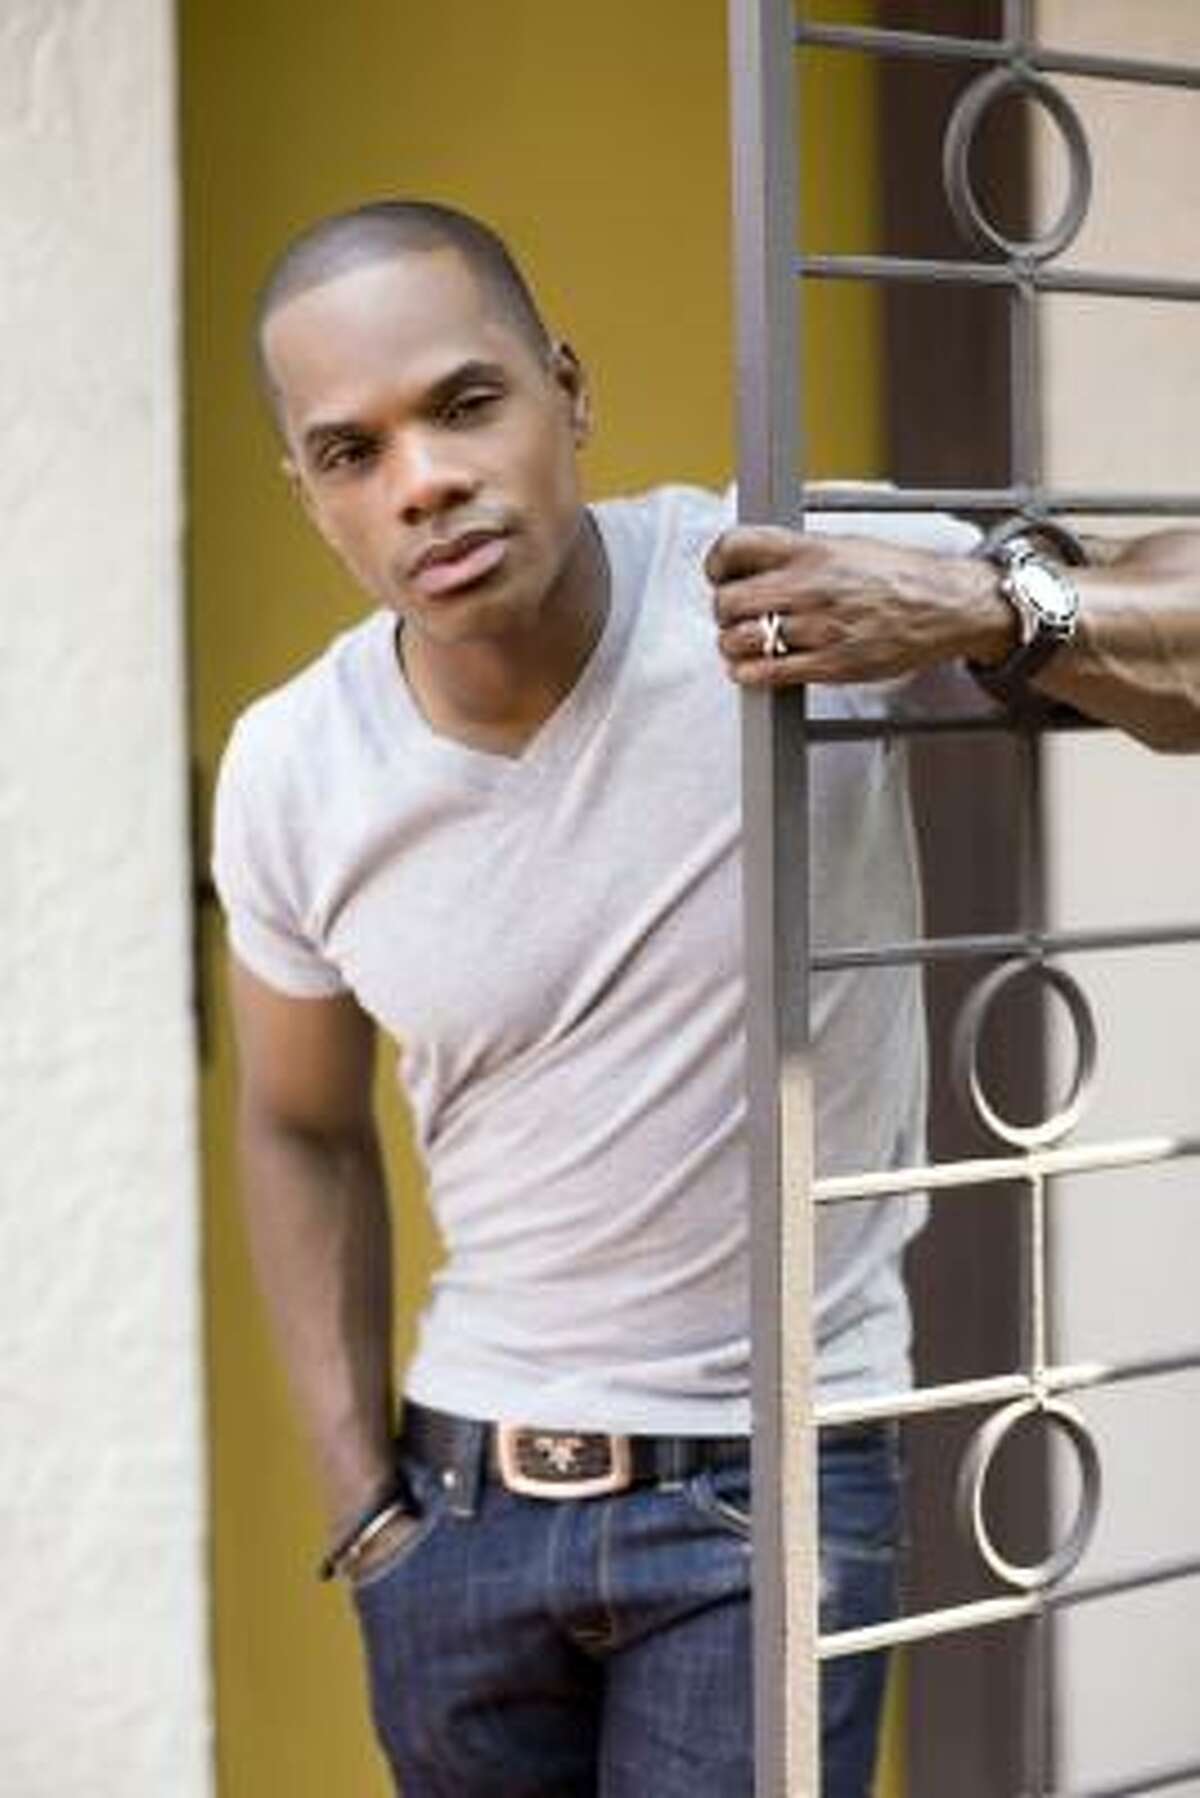 where does kirk franklin live now